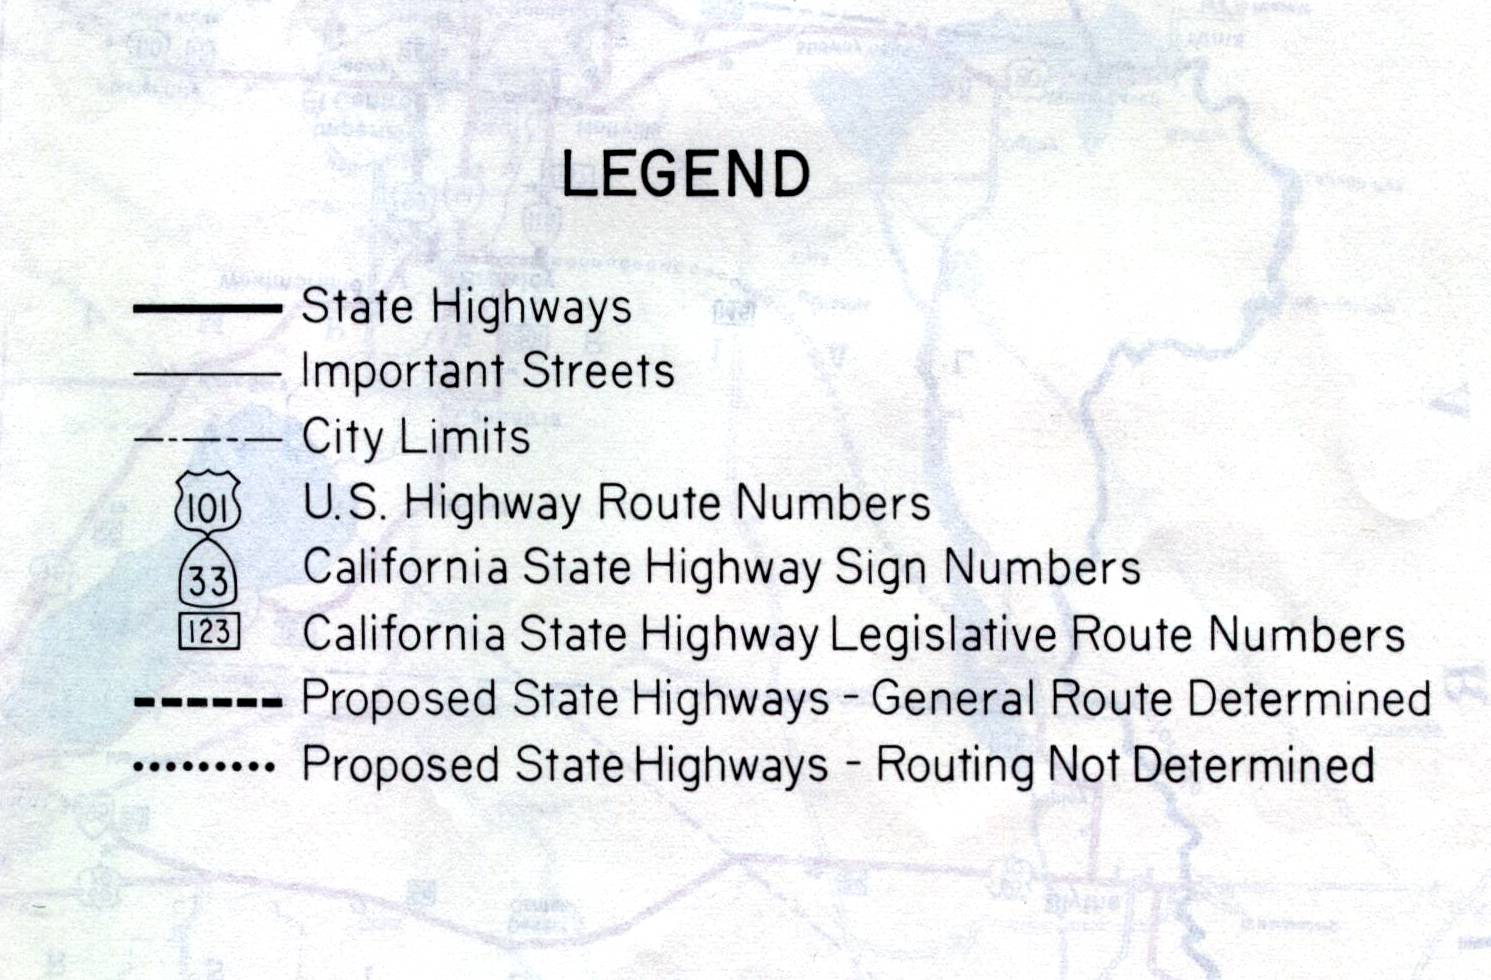 Legend for detailed city maps on the 1961 California official highway map